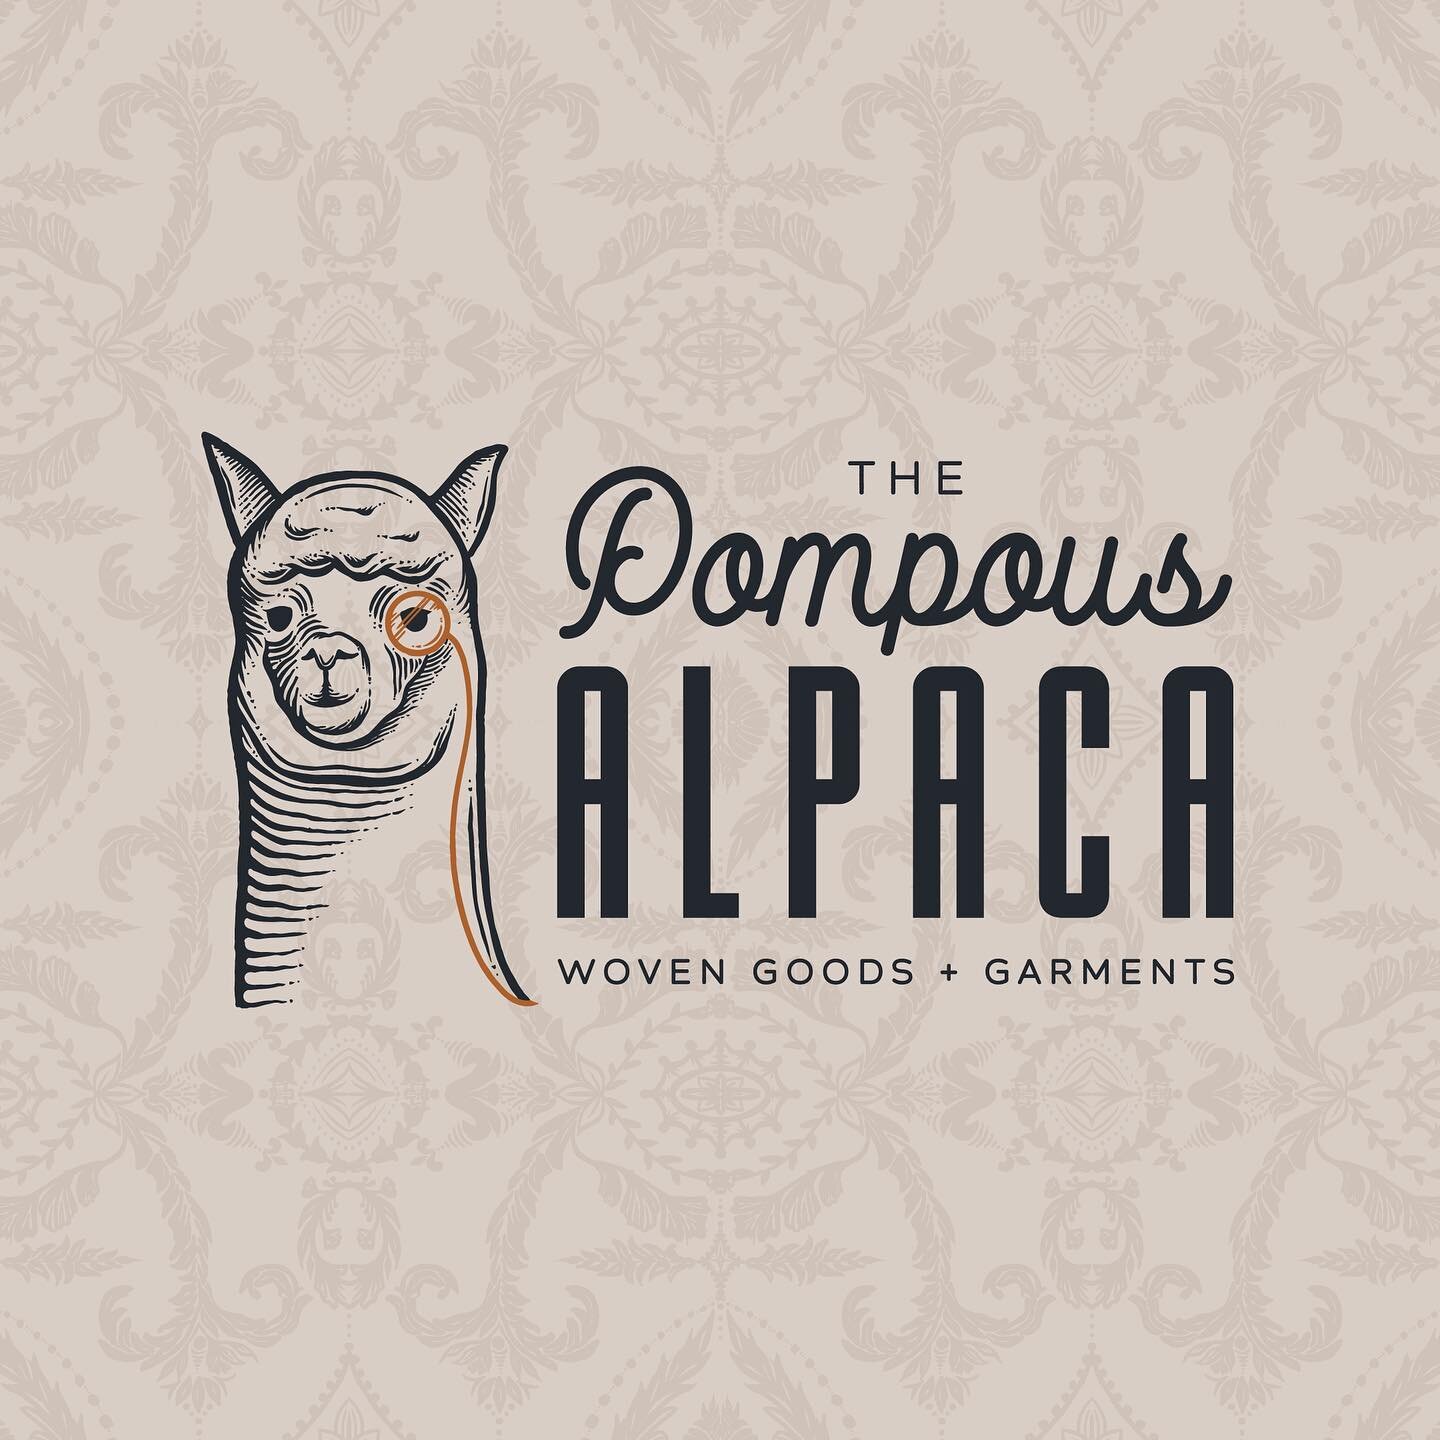 Pompous Alpaca Woven Goods + Garments, a project long time in the making. Pompous Alpaca started as a brand sprint in junior year graphic design that I picked back up in senior portfolio

Recently had some time to finish whats been living in my head 